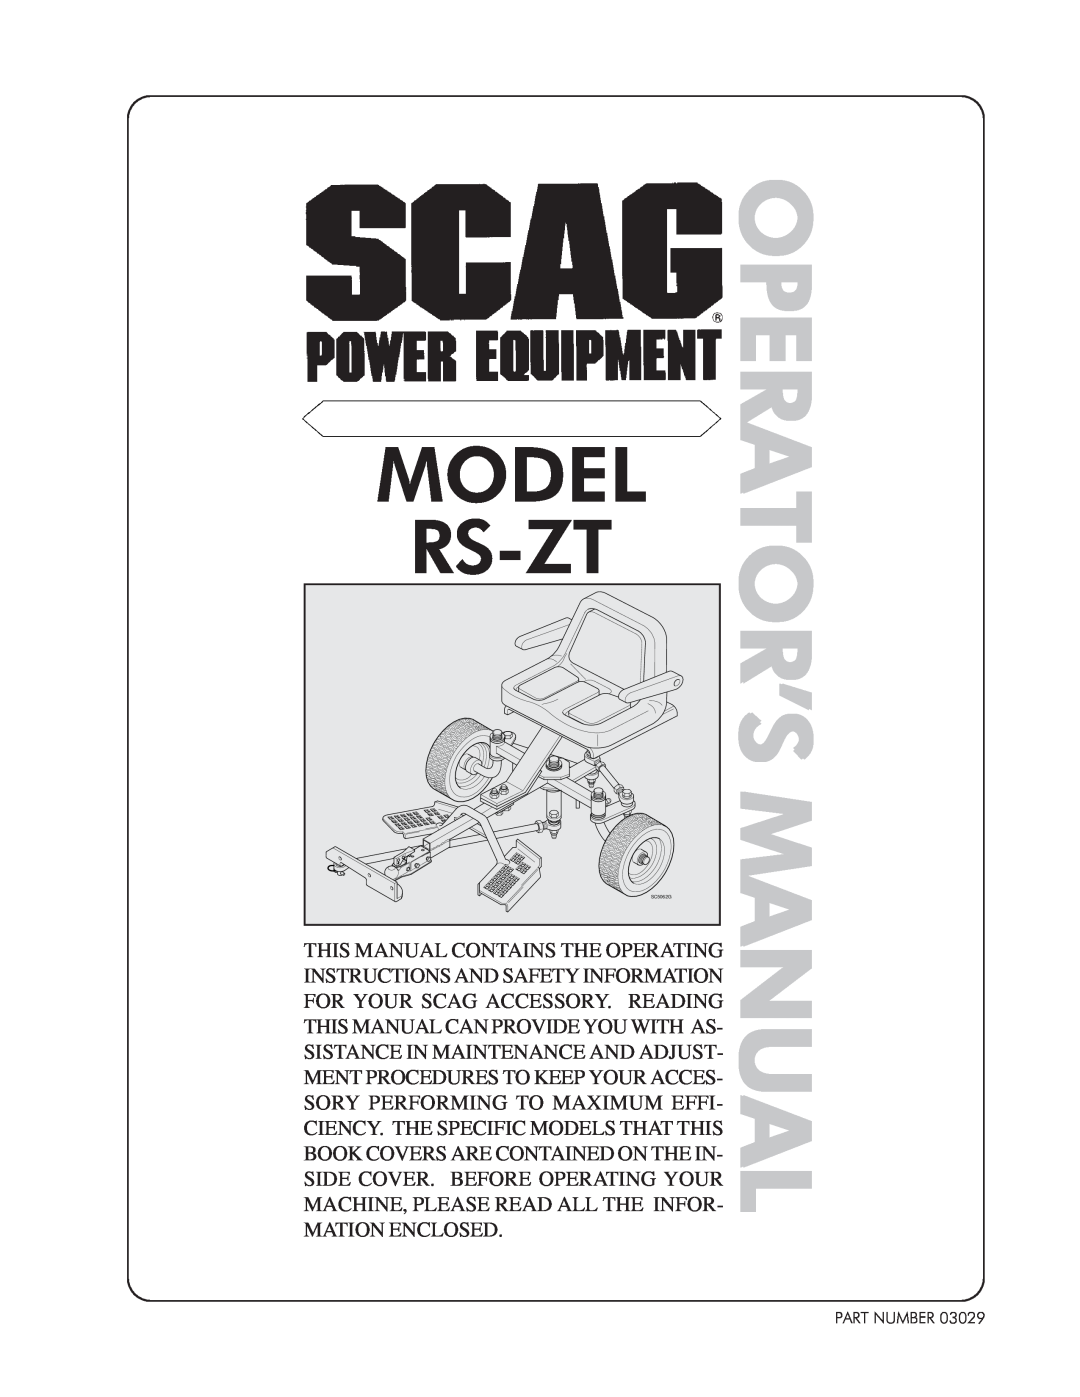 Scag Power Equipment RS-ZT manual Operator’S Manual, Model, Rs-Zt 